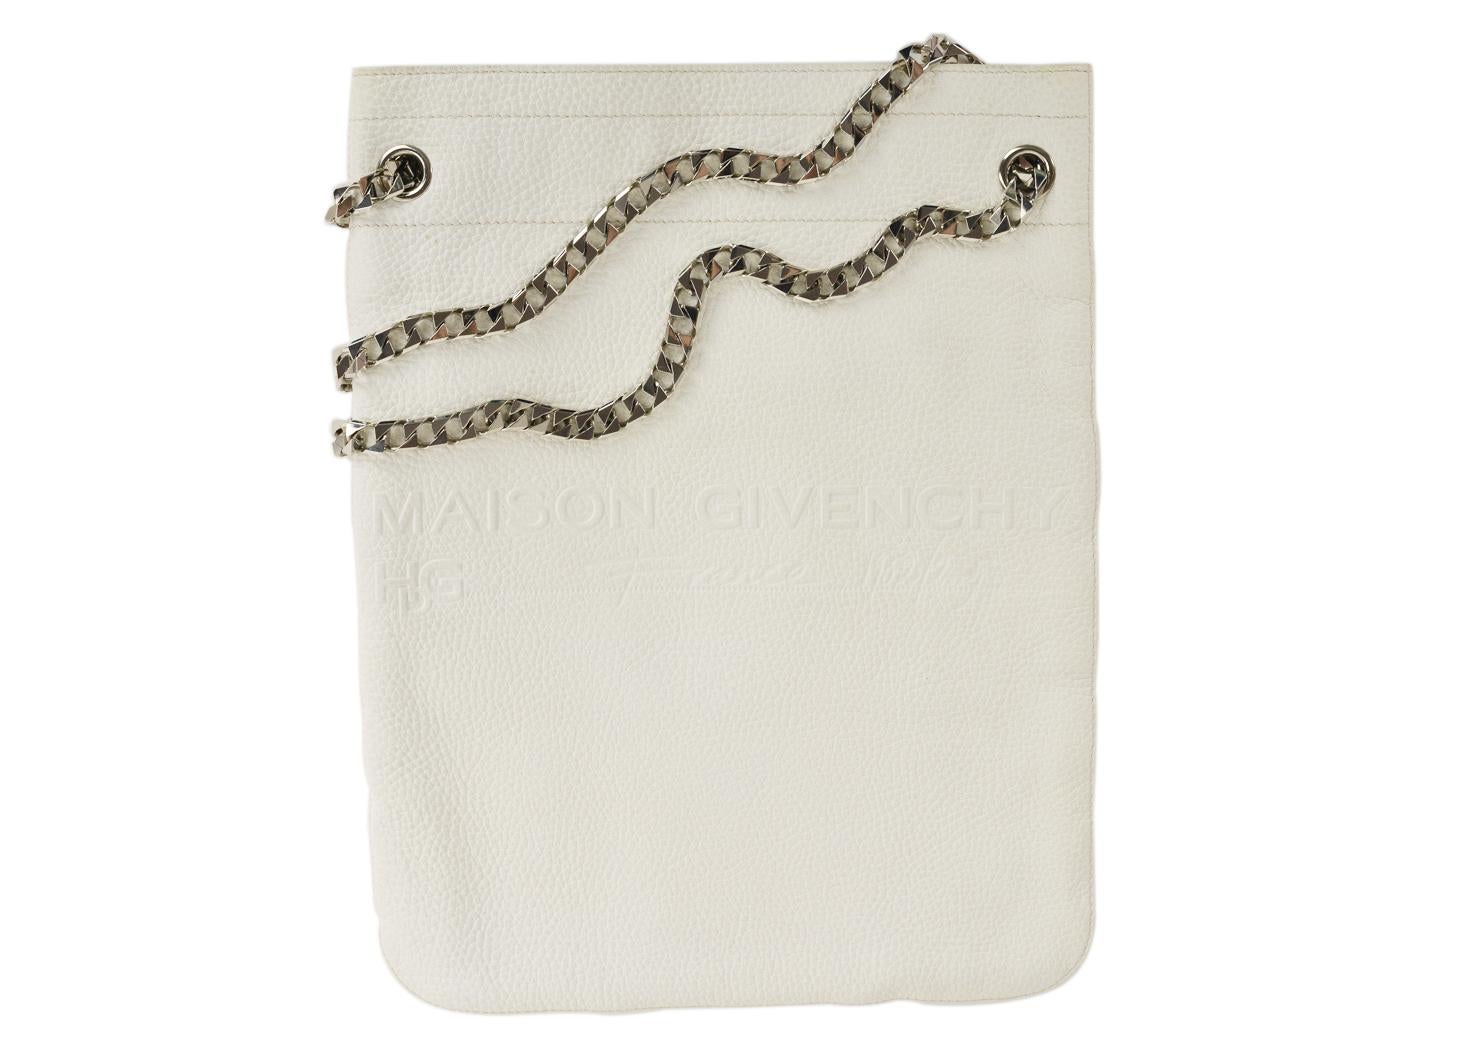 Givenchy white leather chain shoulder bag. This bag features a silver chain shoulder strap with a Maison and Givenchy embossed logo on the front. This bag is perfect tos tore all your everyday essentials with its spacious